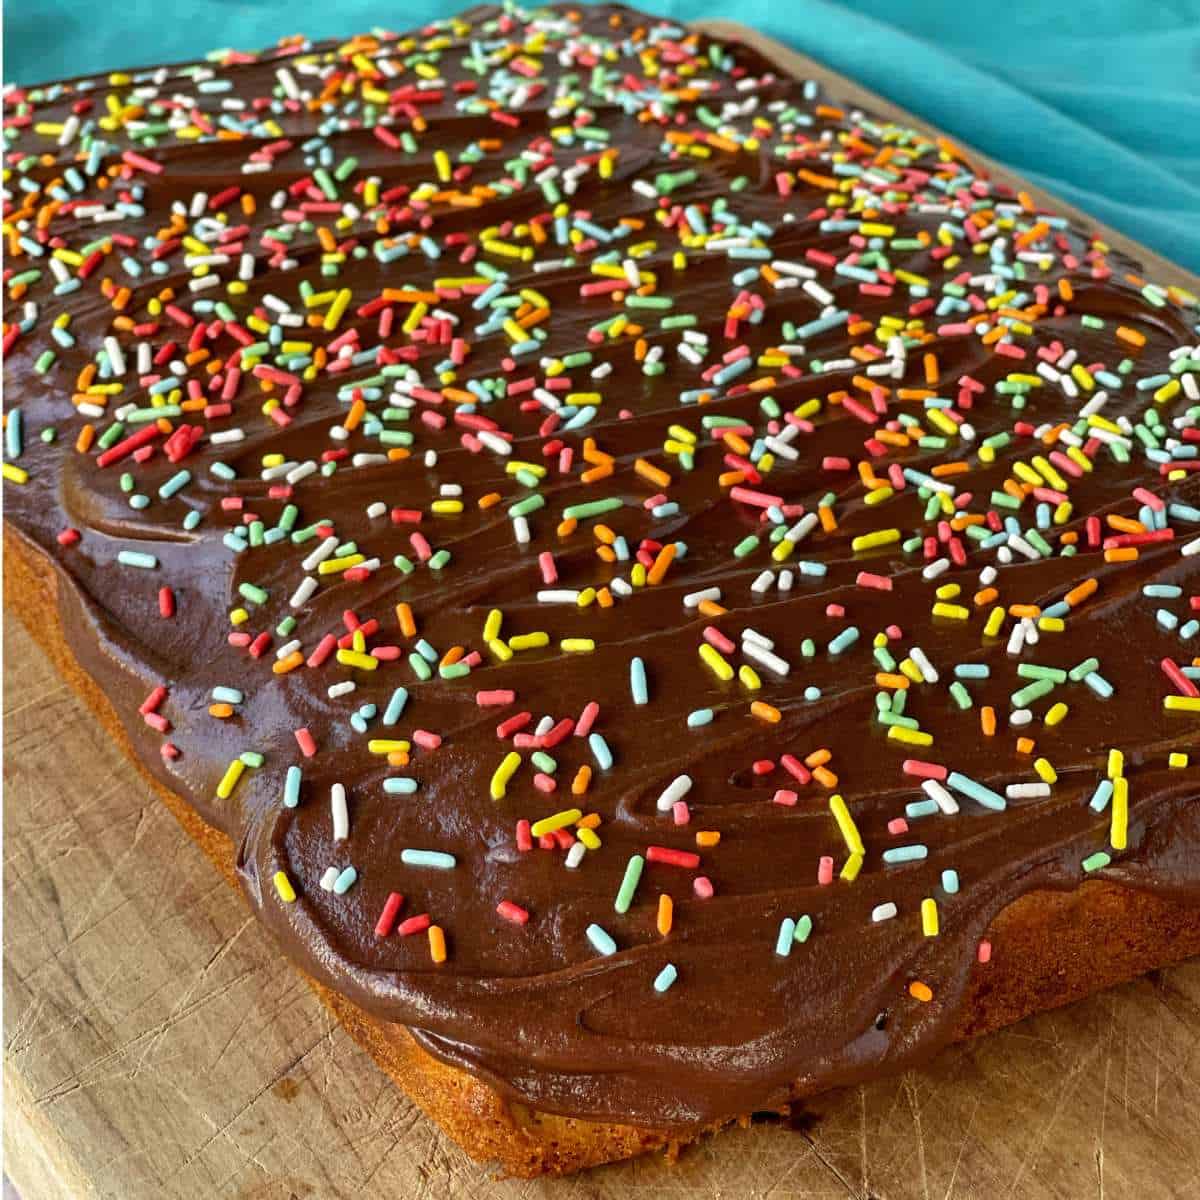 Beautifully cooked banana cake with chocolate icing and colourful sprinkles on a wooden chopping board